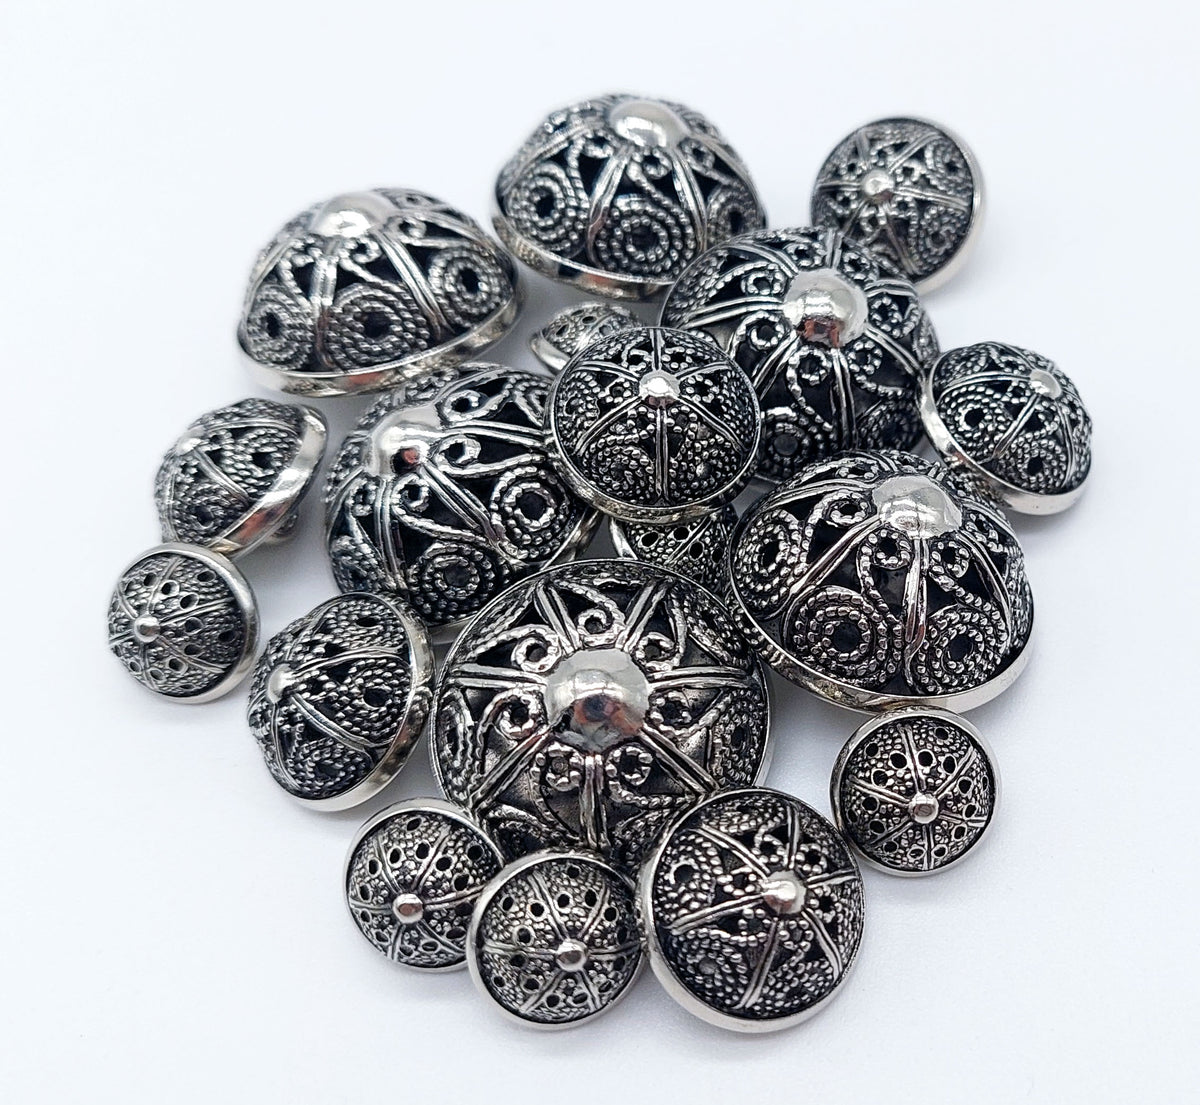 Silver-Plated Clothing Buttons - Jackets, Coats, Crafts & Sewing